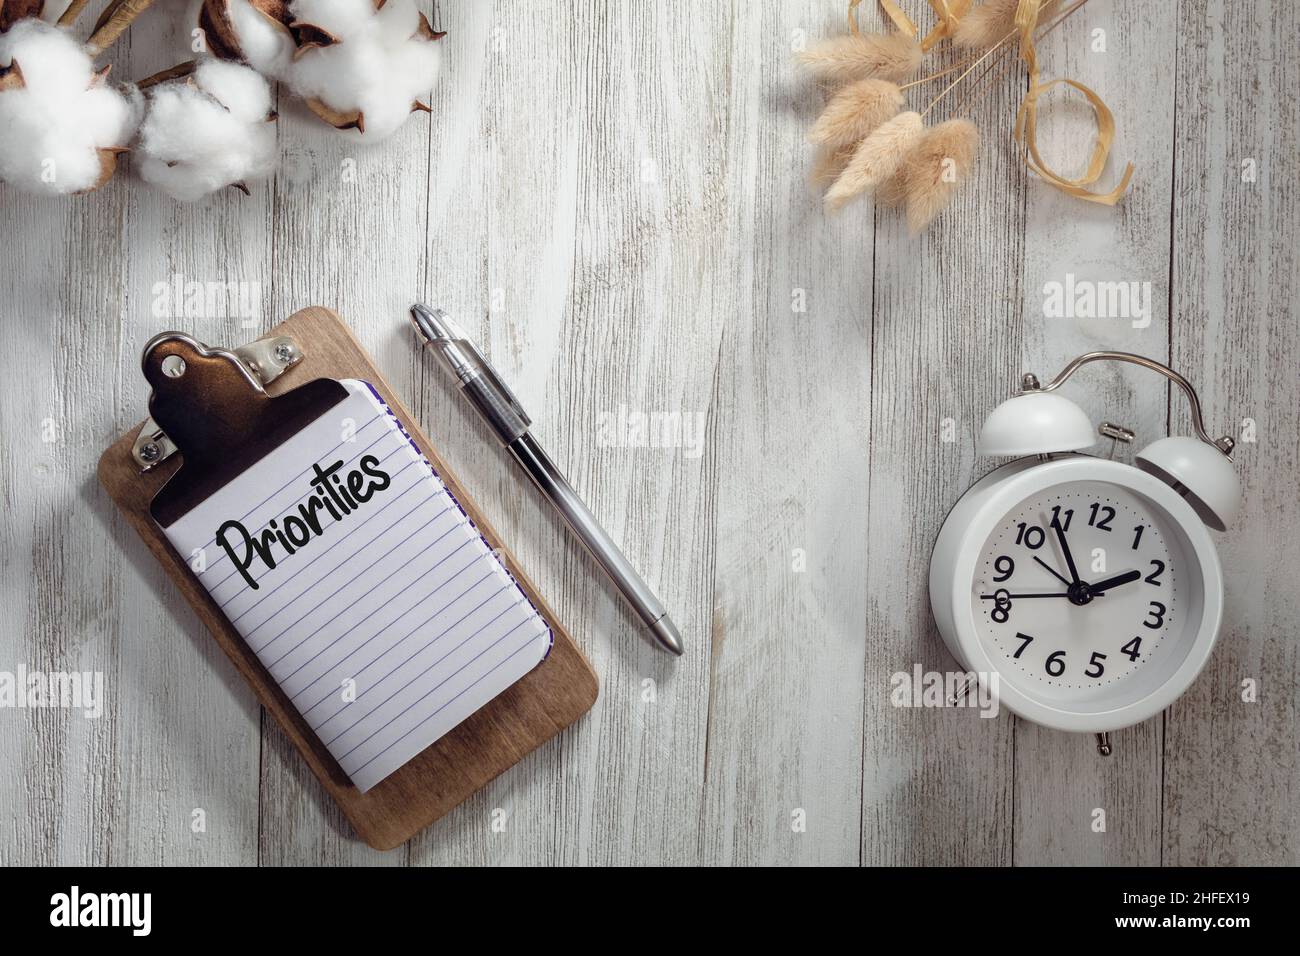 PRIORITIES text on notepad rustic wood flat lay with alarm clock and natural elements.  Time management concept. Stock Photo